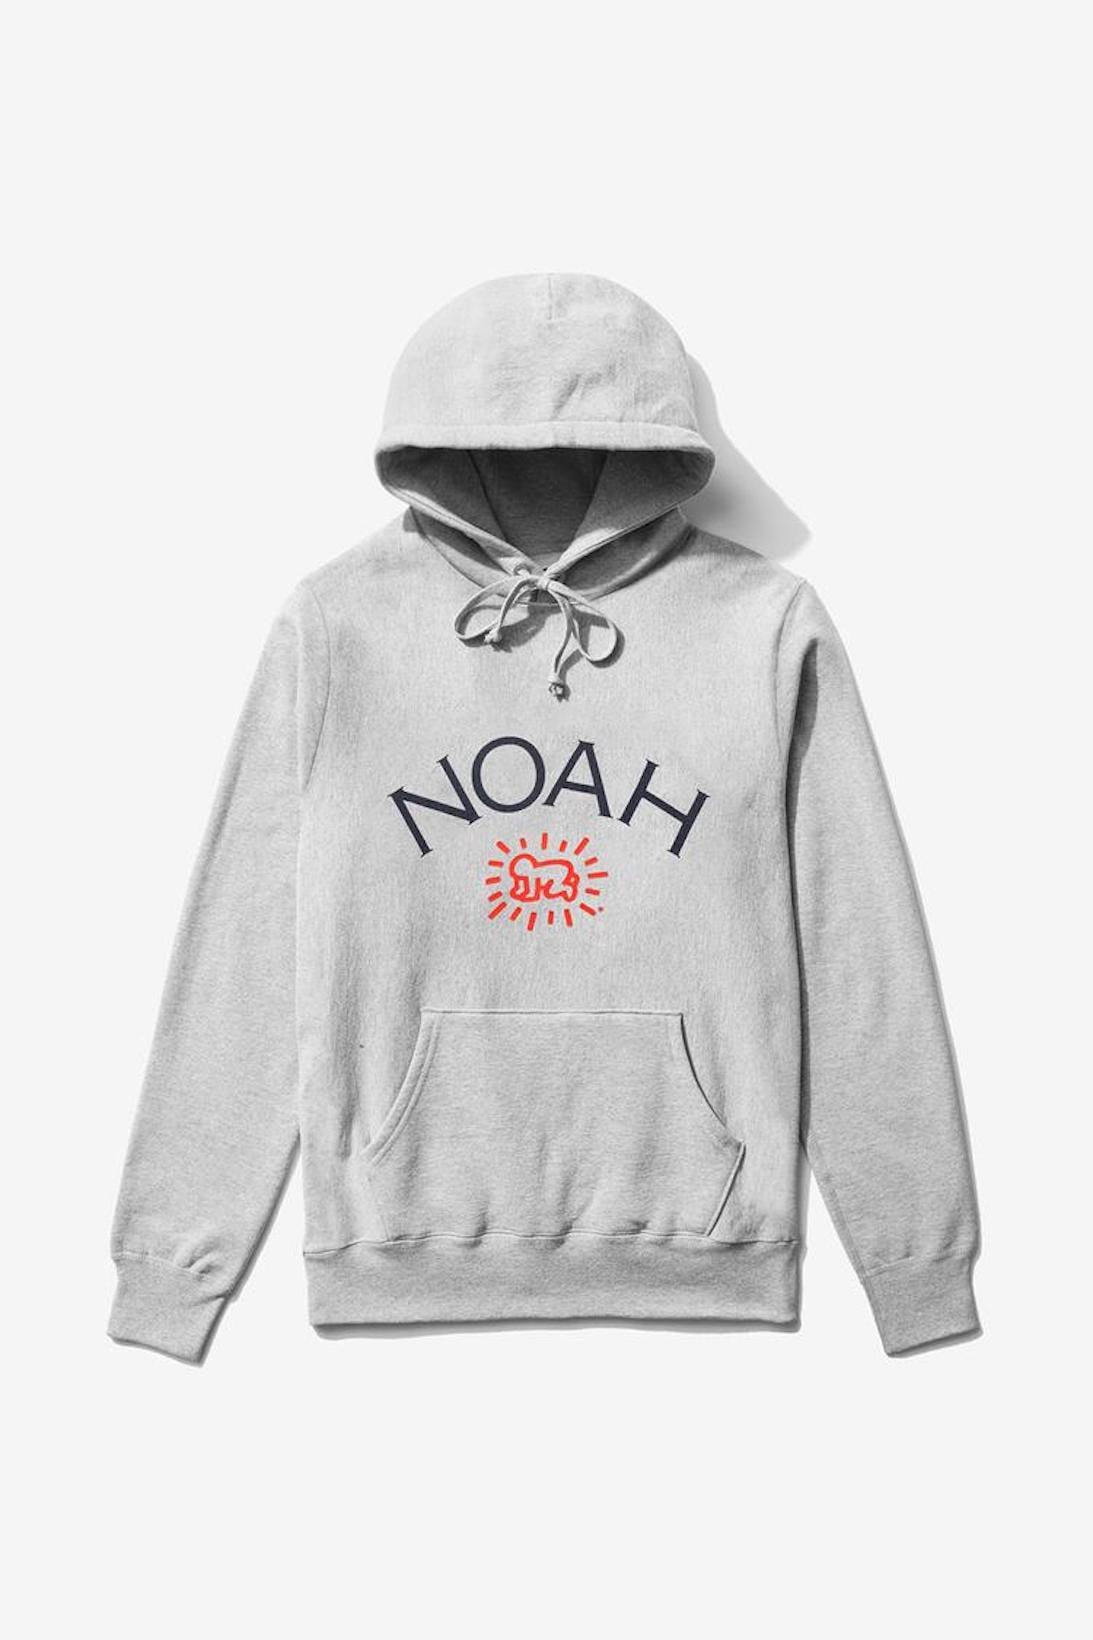 NOAH Keith Haring Christmas Collaboration Collection Hoodie Front